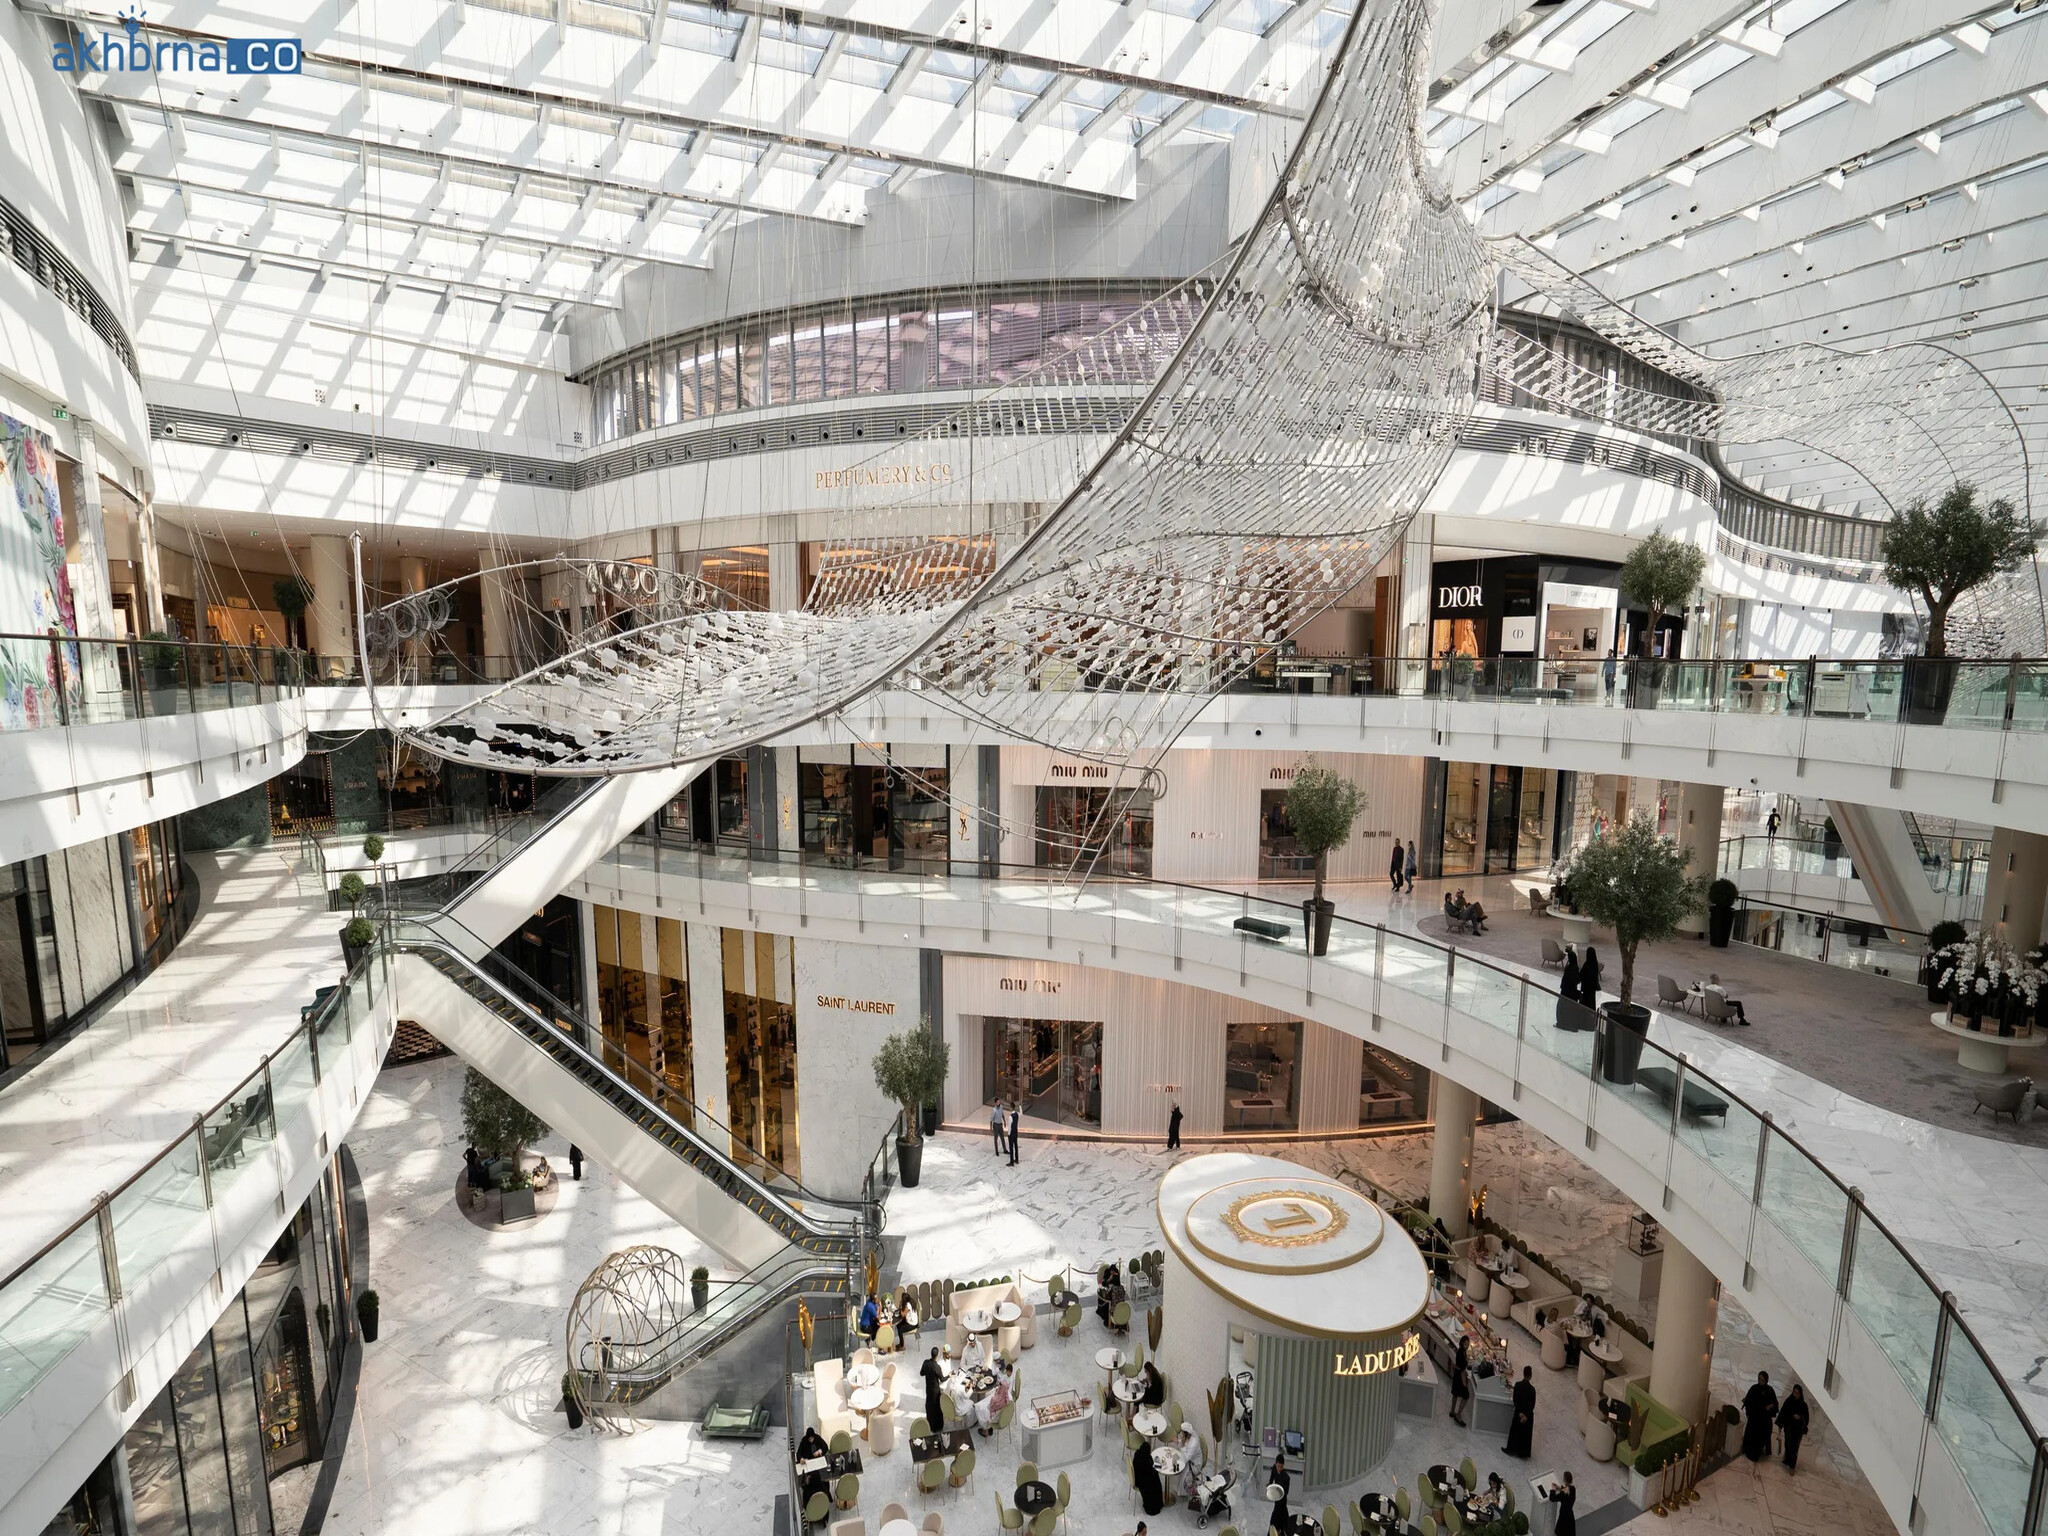 Dubai Mall Unveils Massive Expansion, Adding 240 New Stores in $408m Project